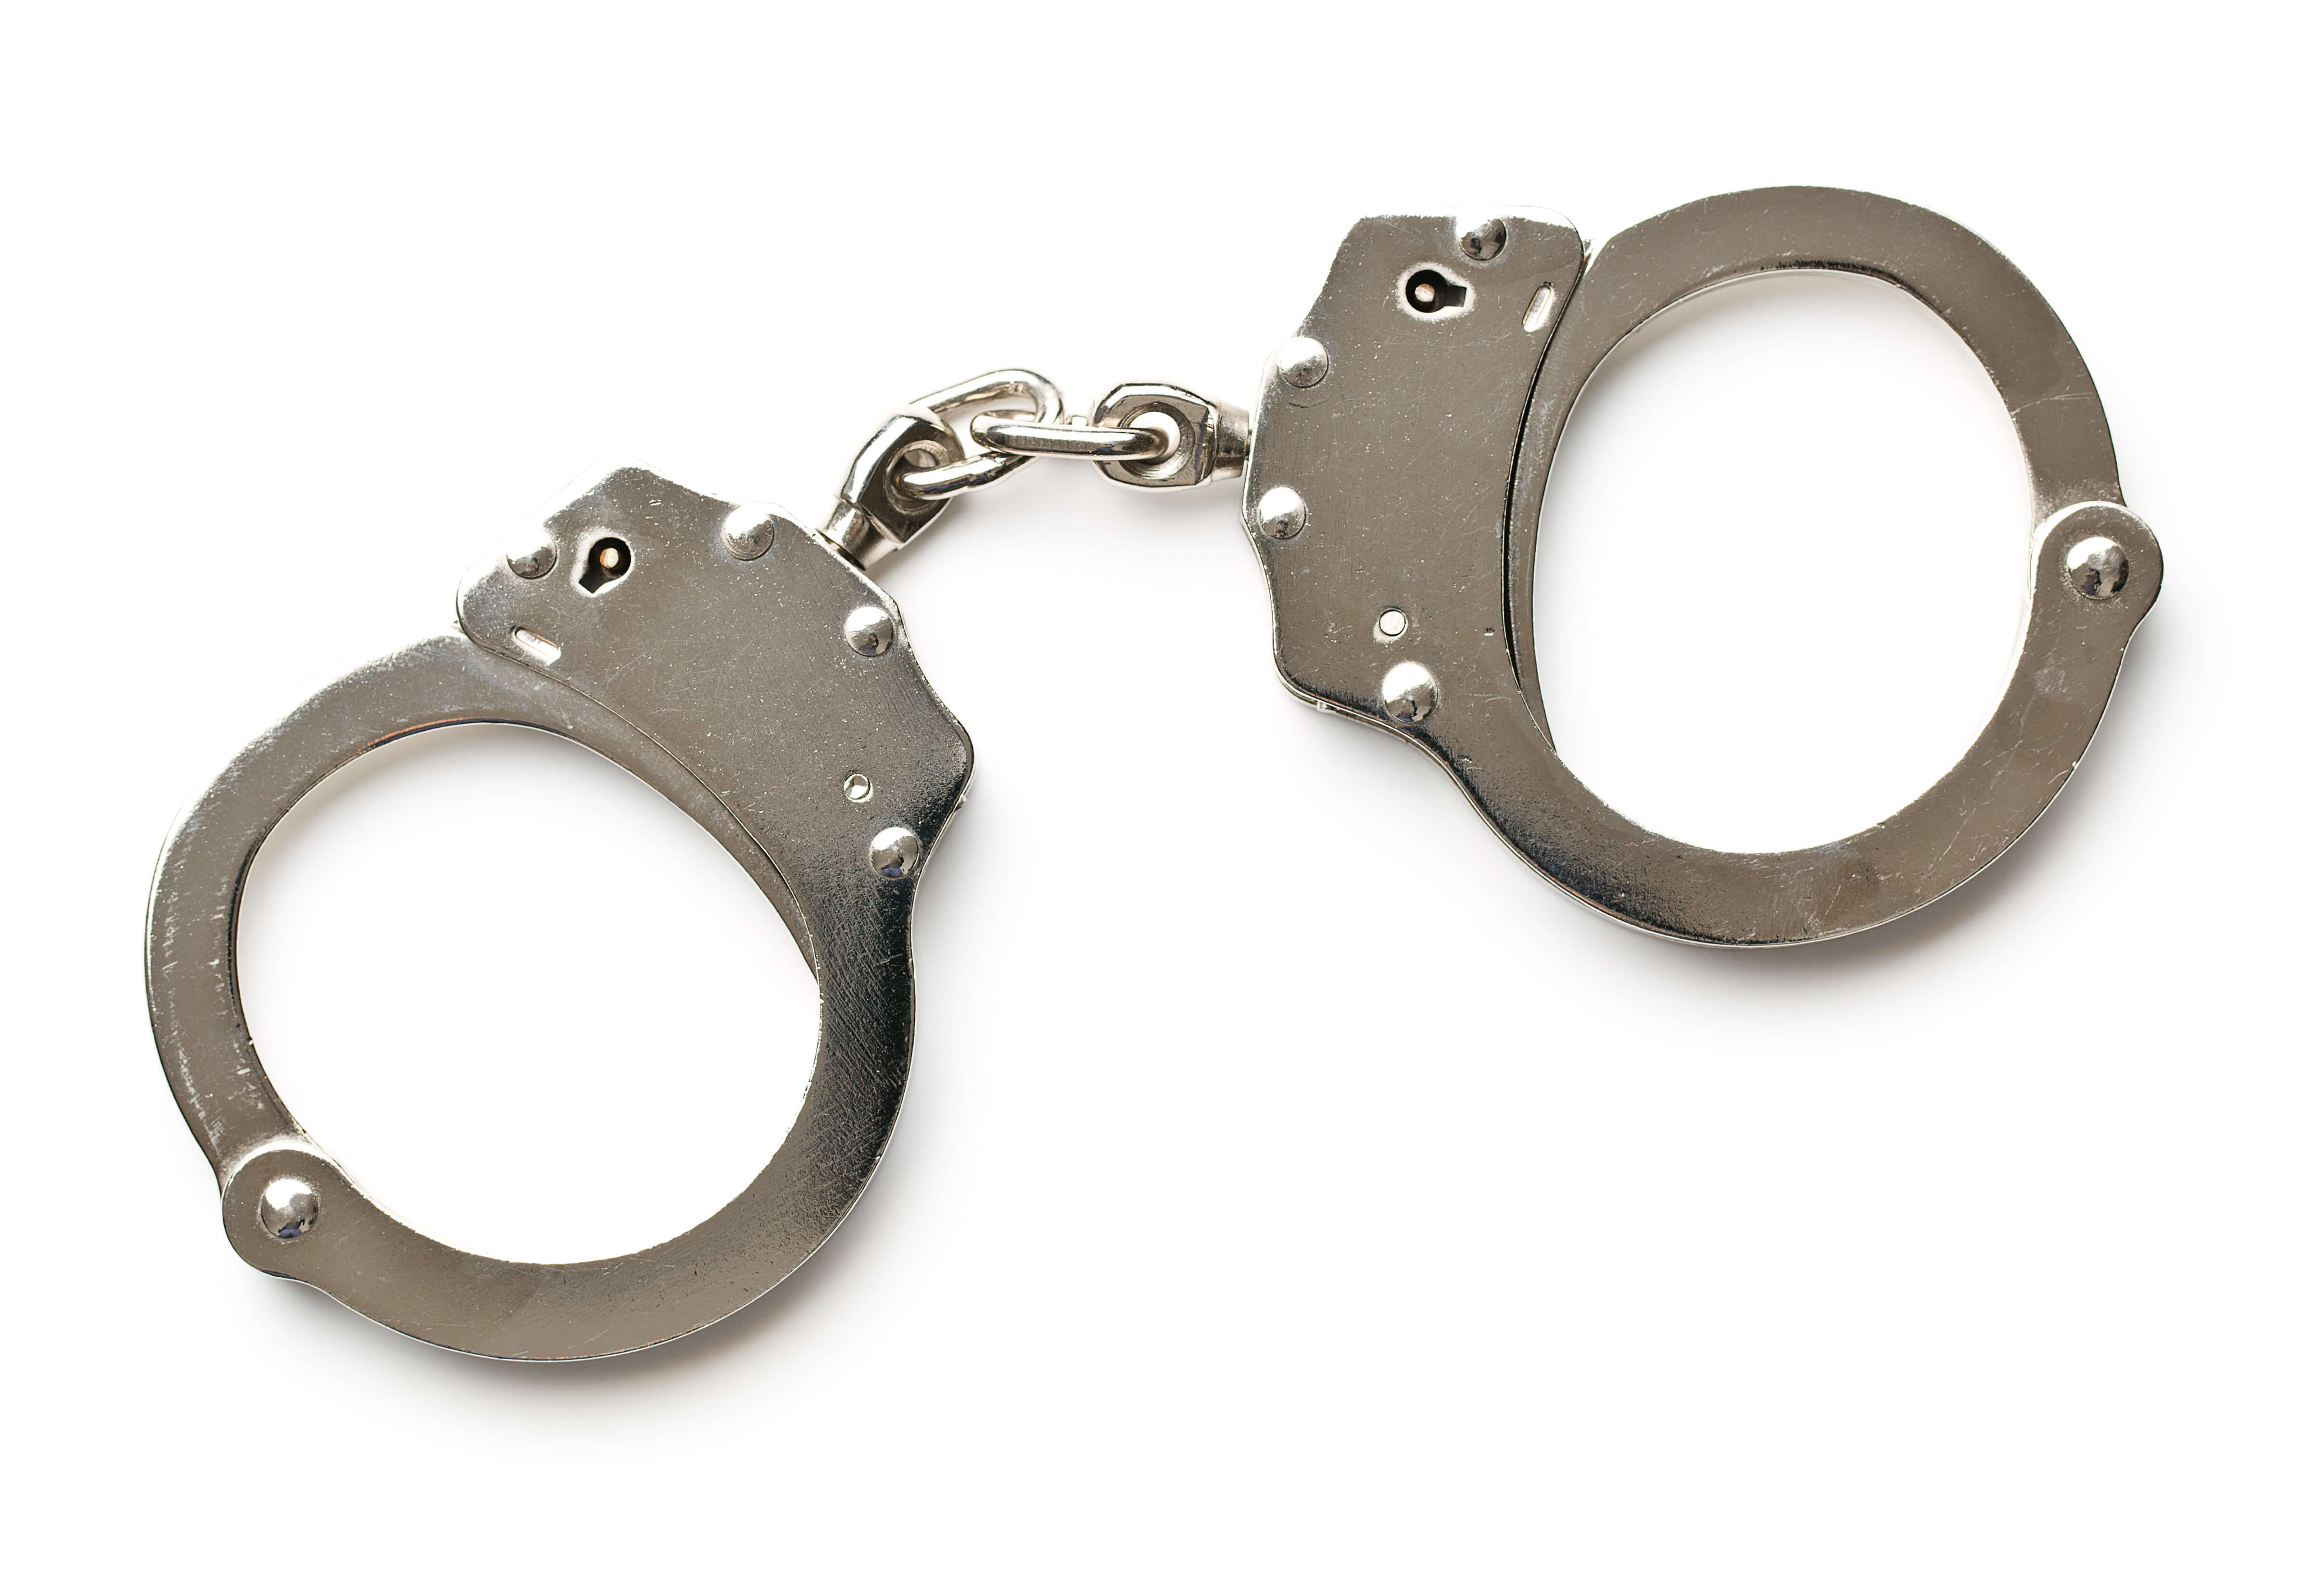 Handcuffs - difference between felonies and misdemeanors